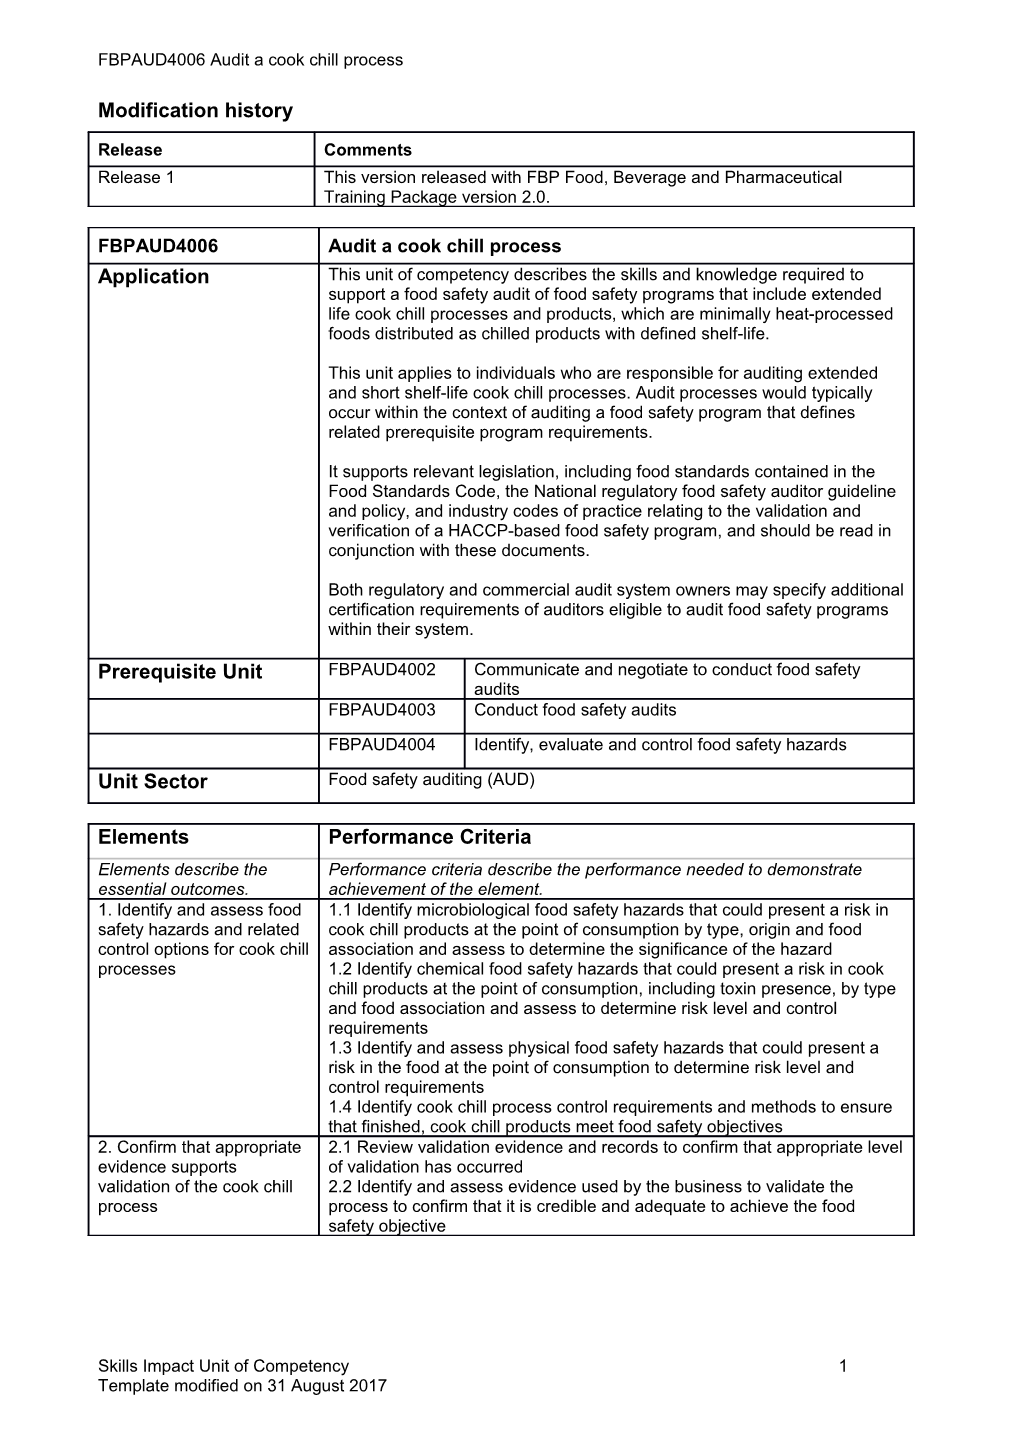 Skills Impact Unit of Competency Template s20